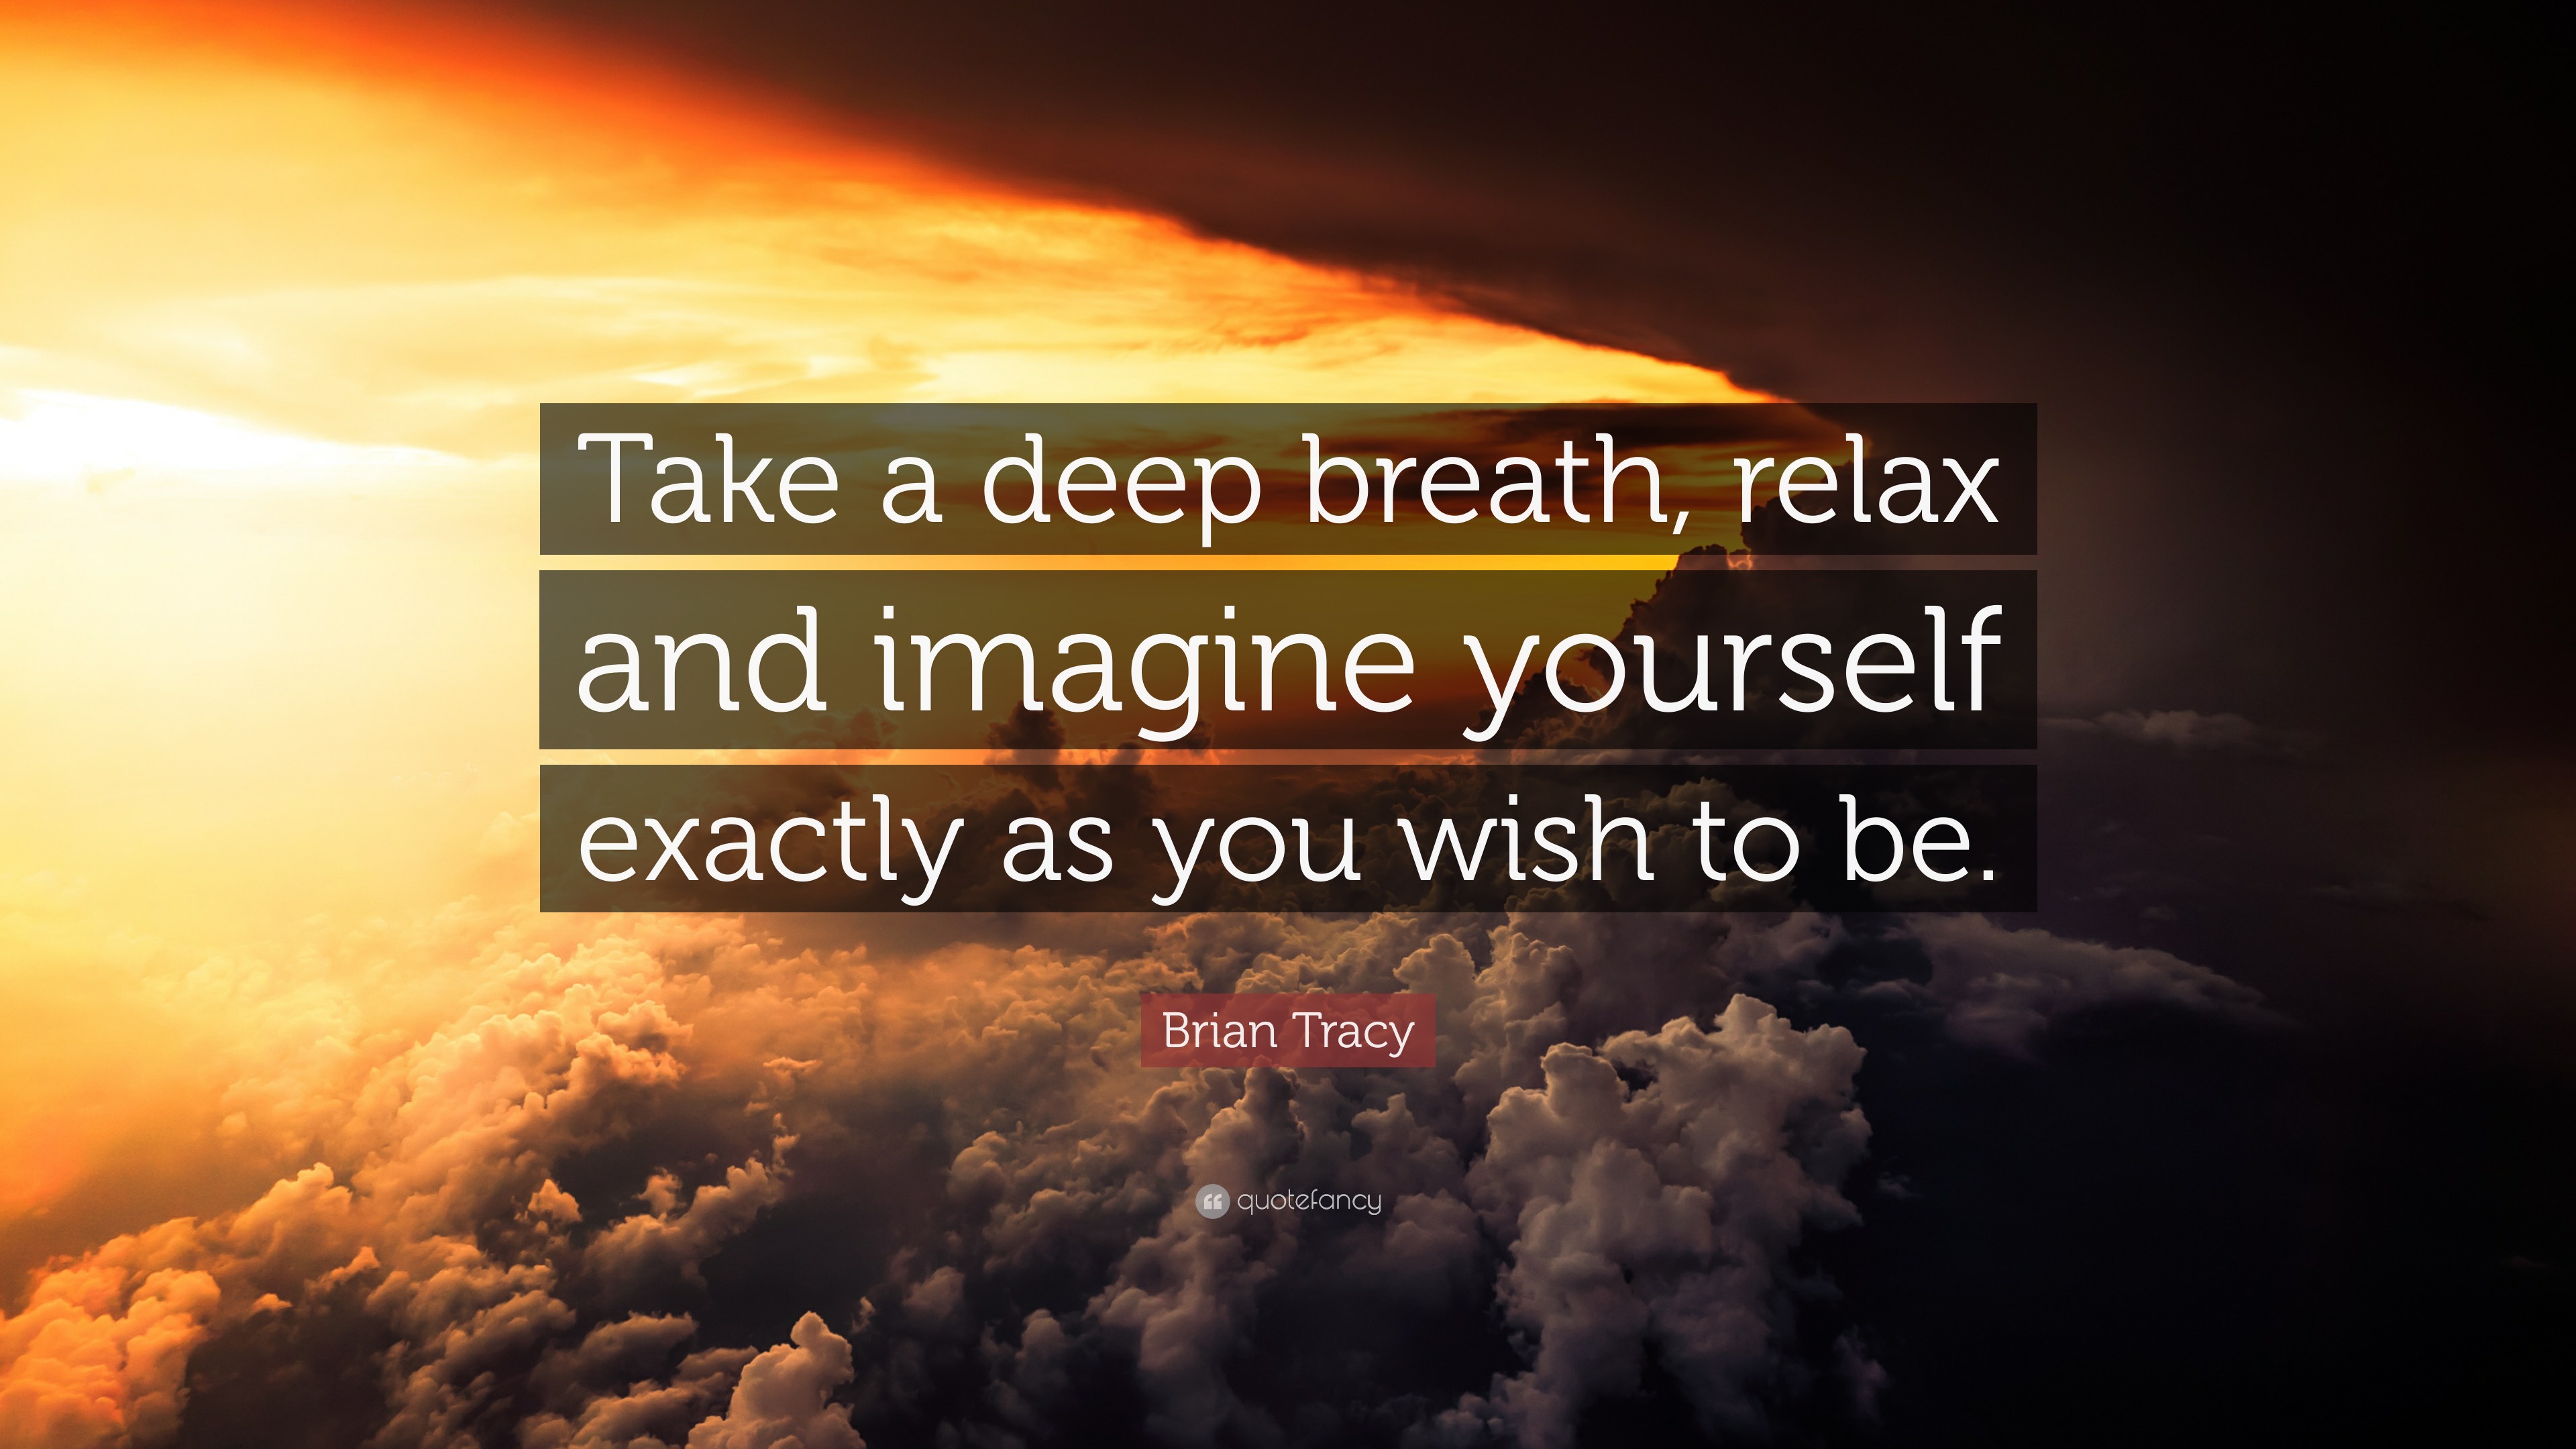 Brian Tracy Quote: “Take a deep breath, relax and imagine yourself